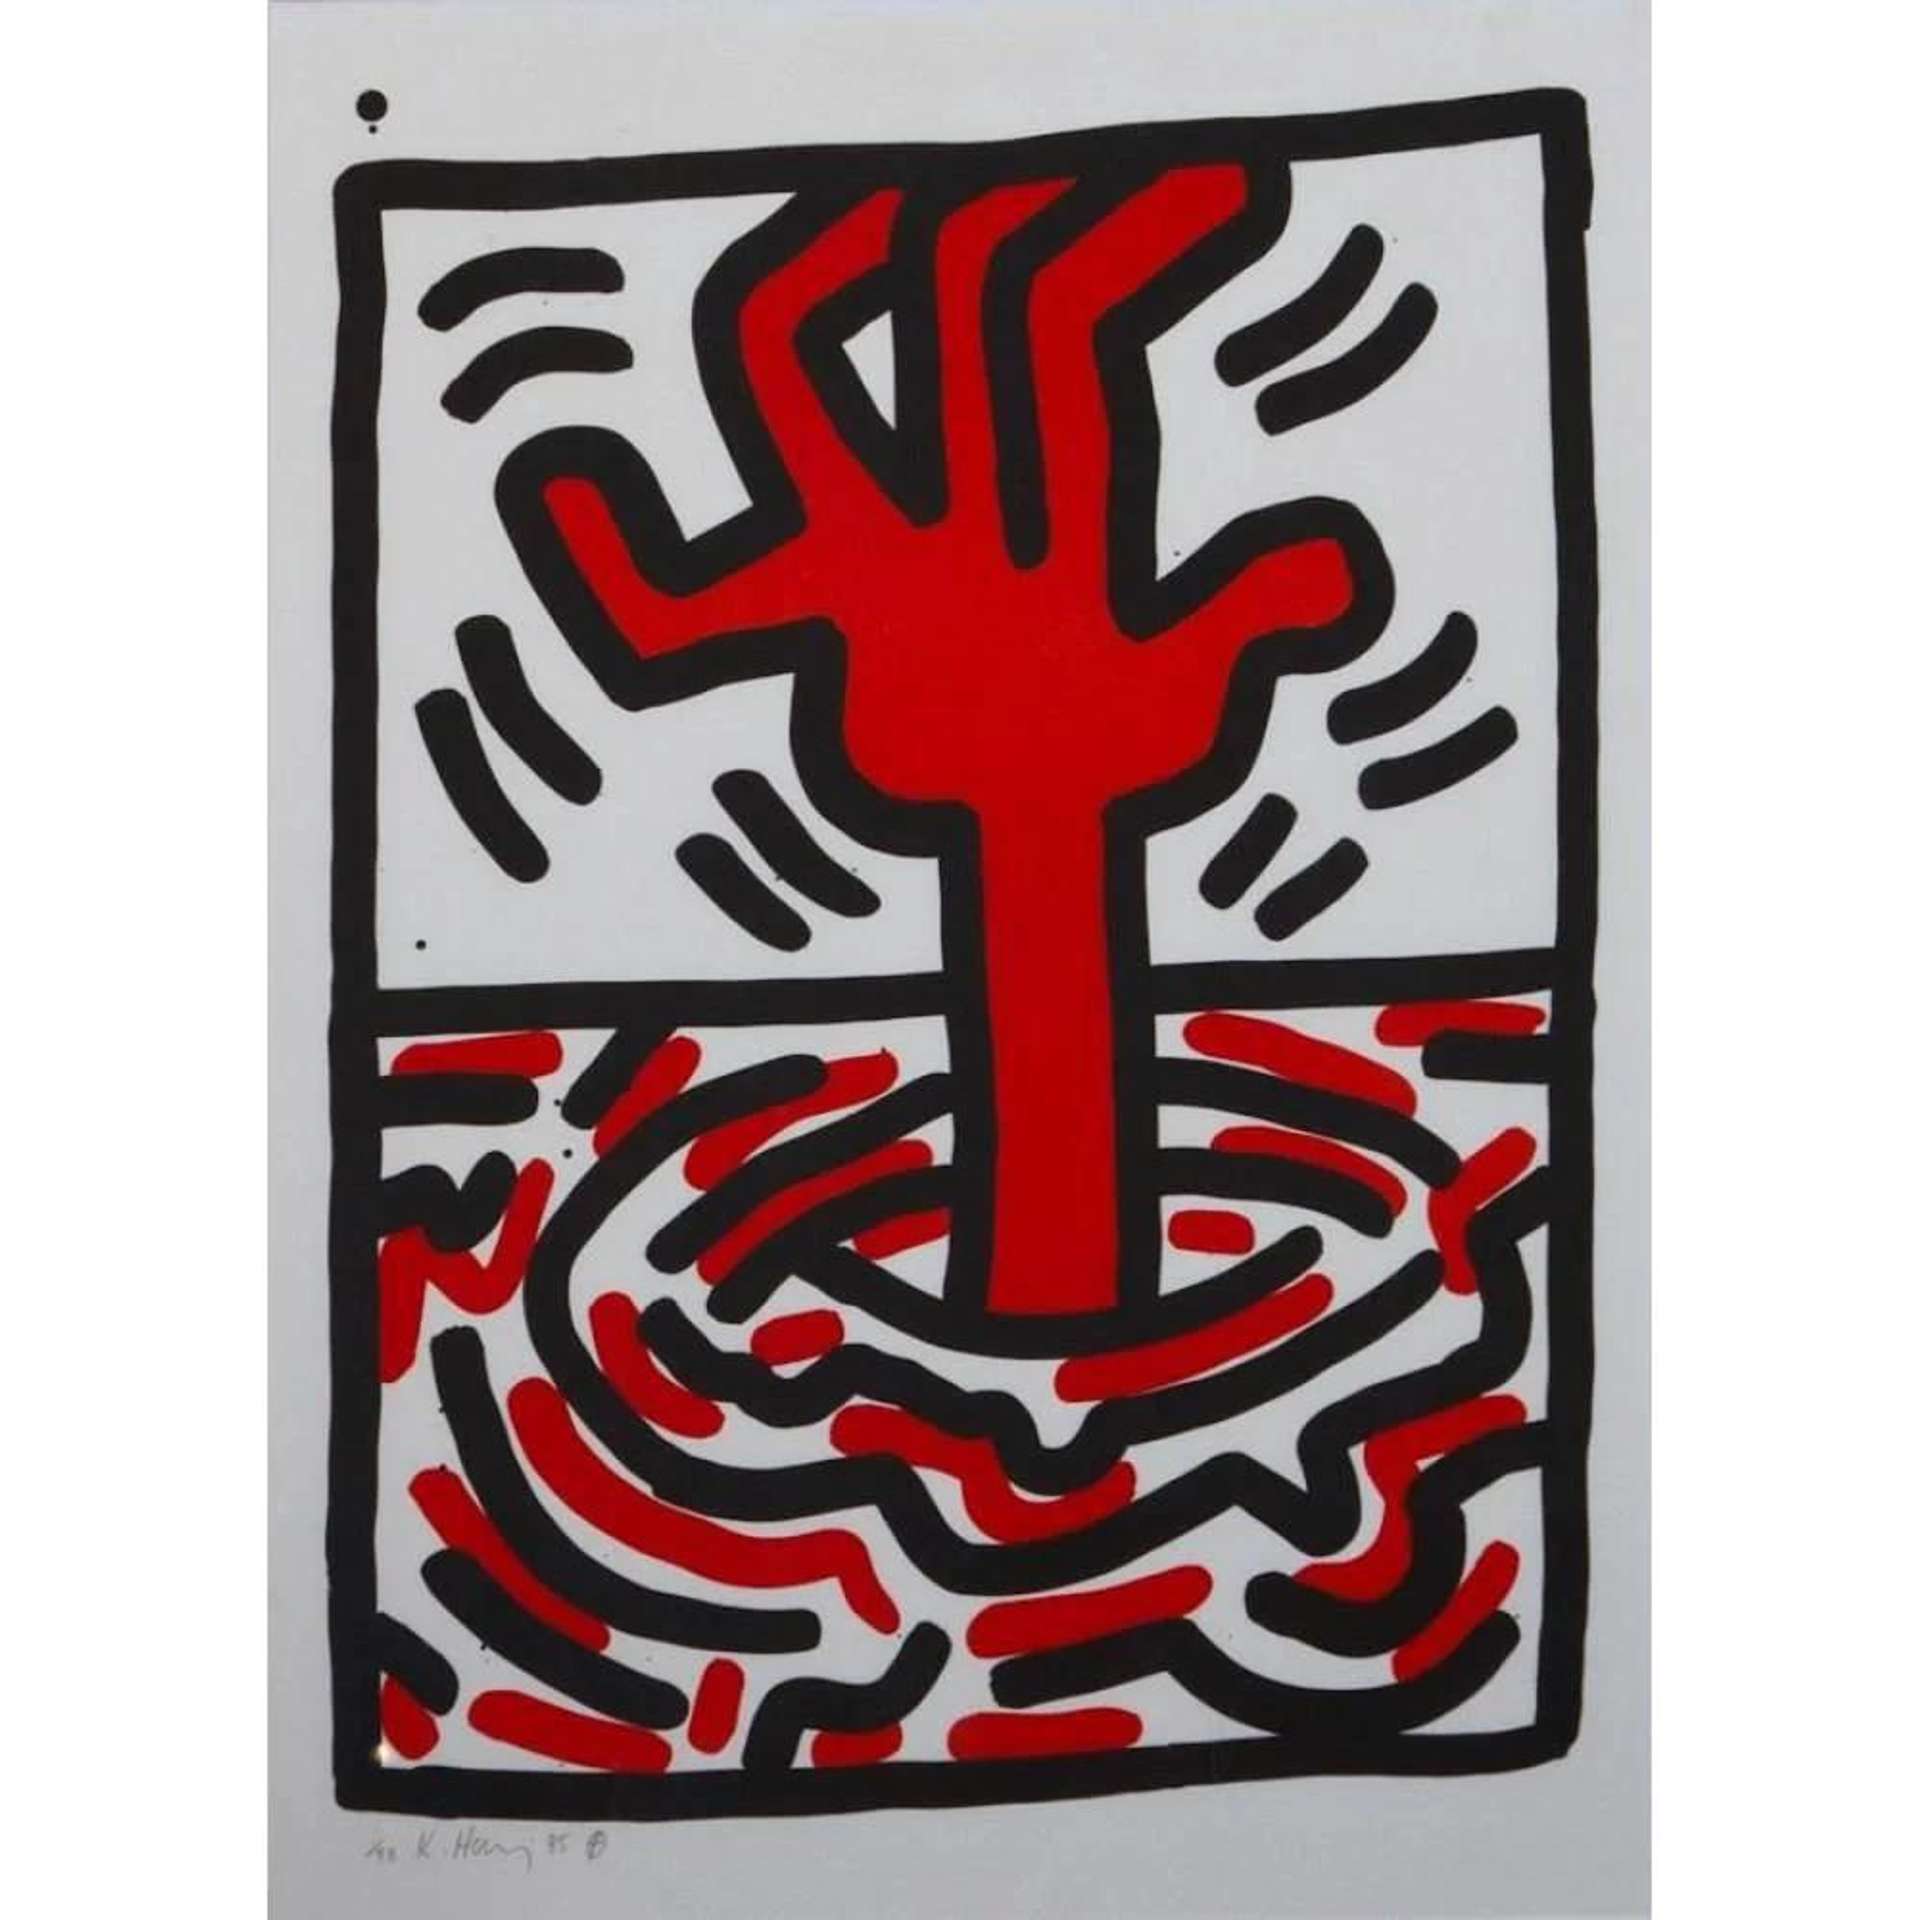 Ludo 5 - Signed Print by Keith Haring 1985 - MyArtBroker